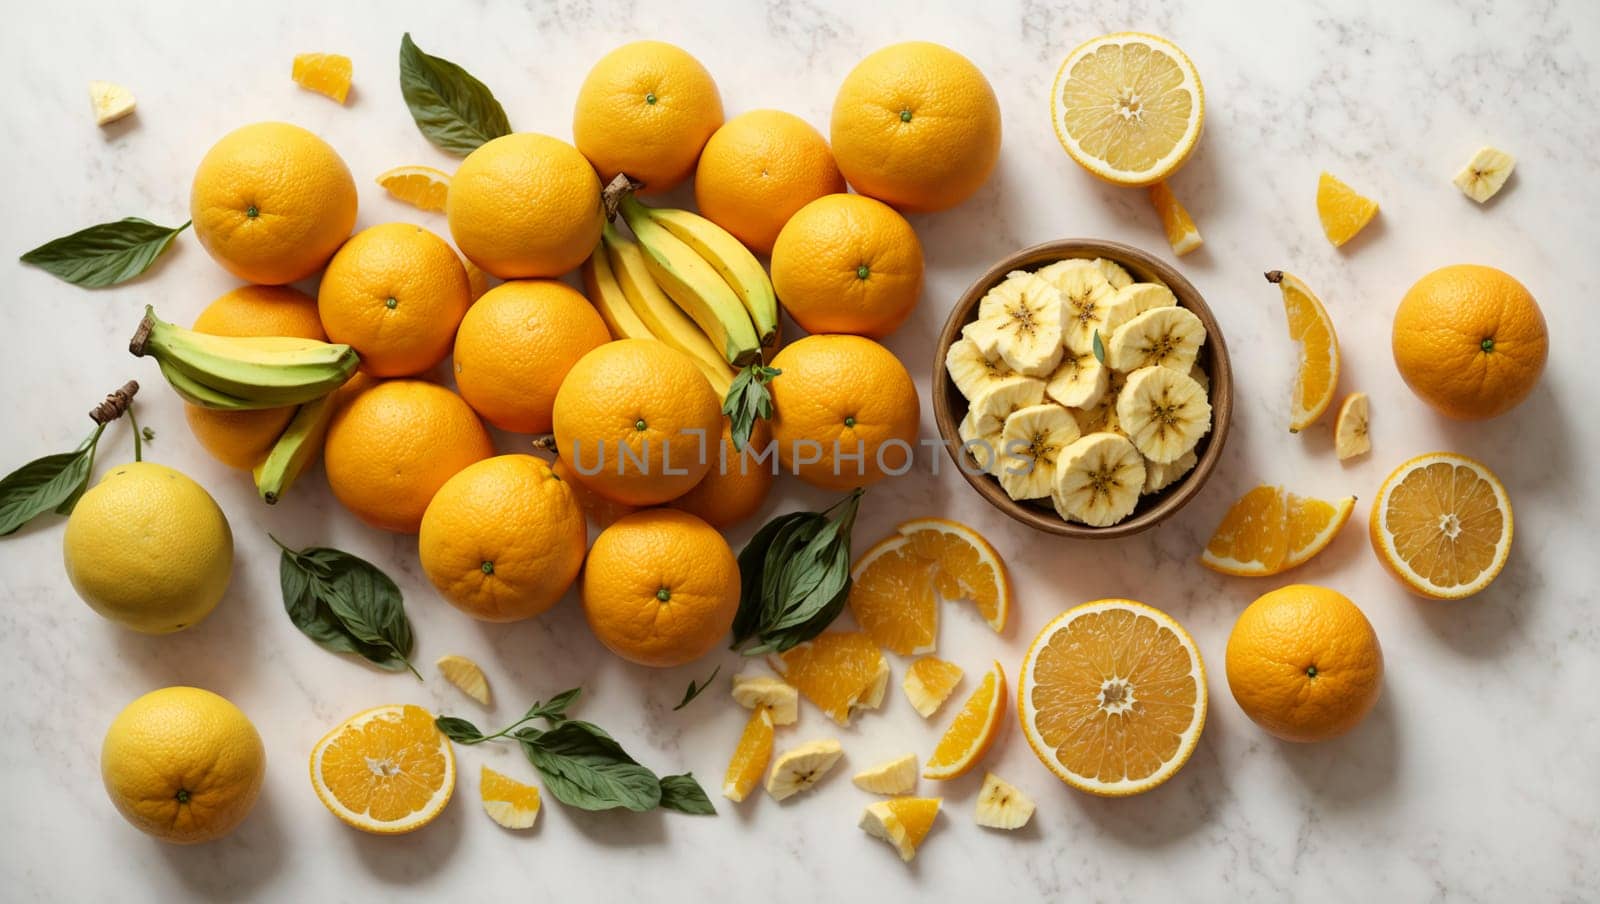 yellow ripe bananas and oranges lying on a bright white background top view